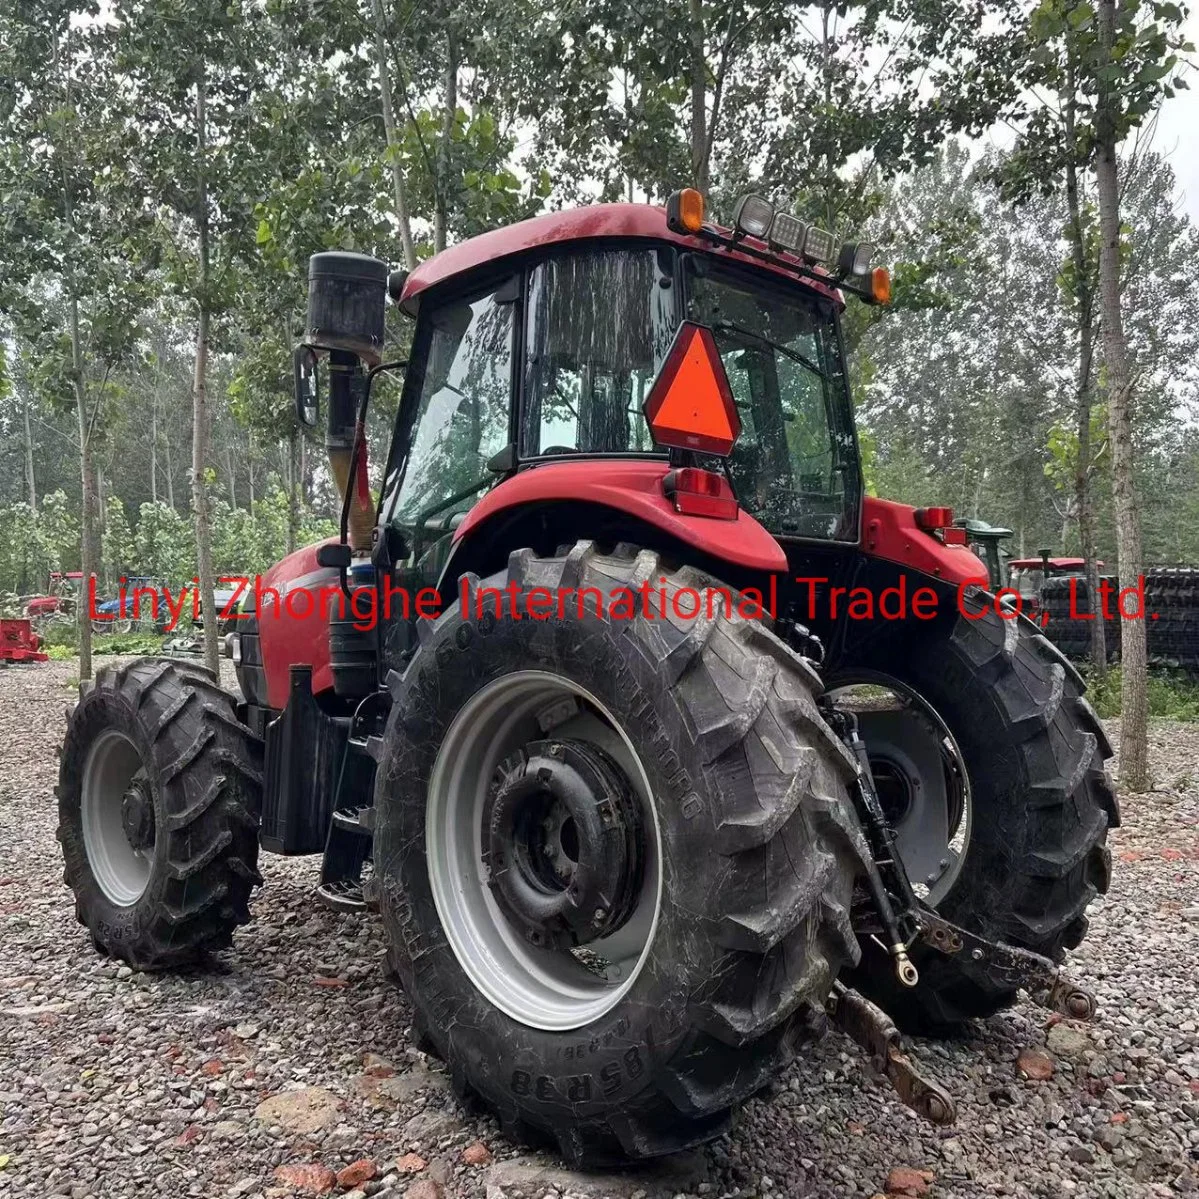 Big Promotion 10-300HP Micro Chinese Garden Tractor Attachments for Agriculture